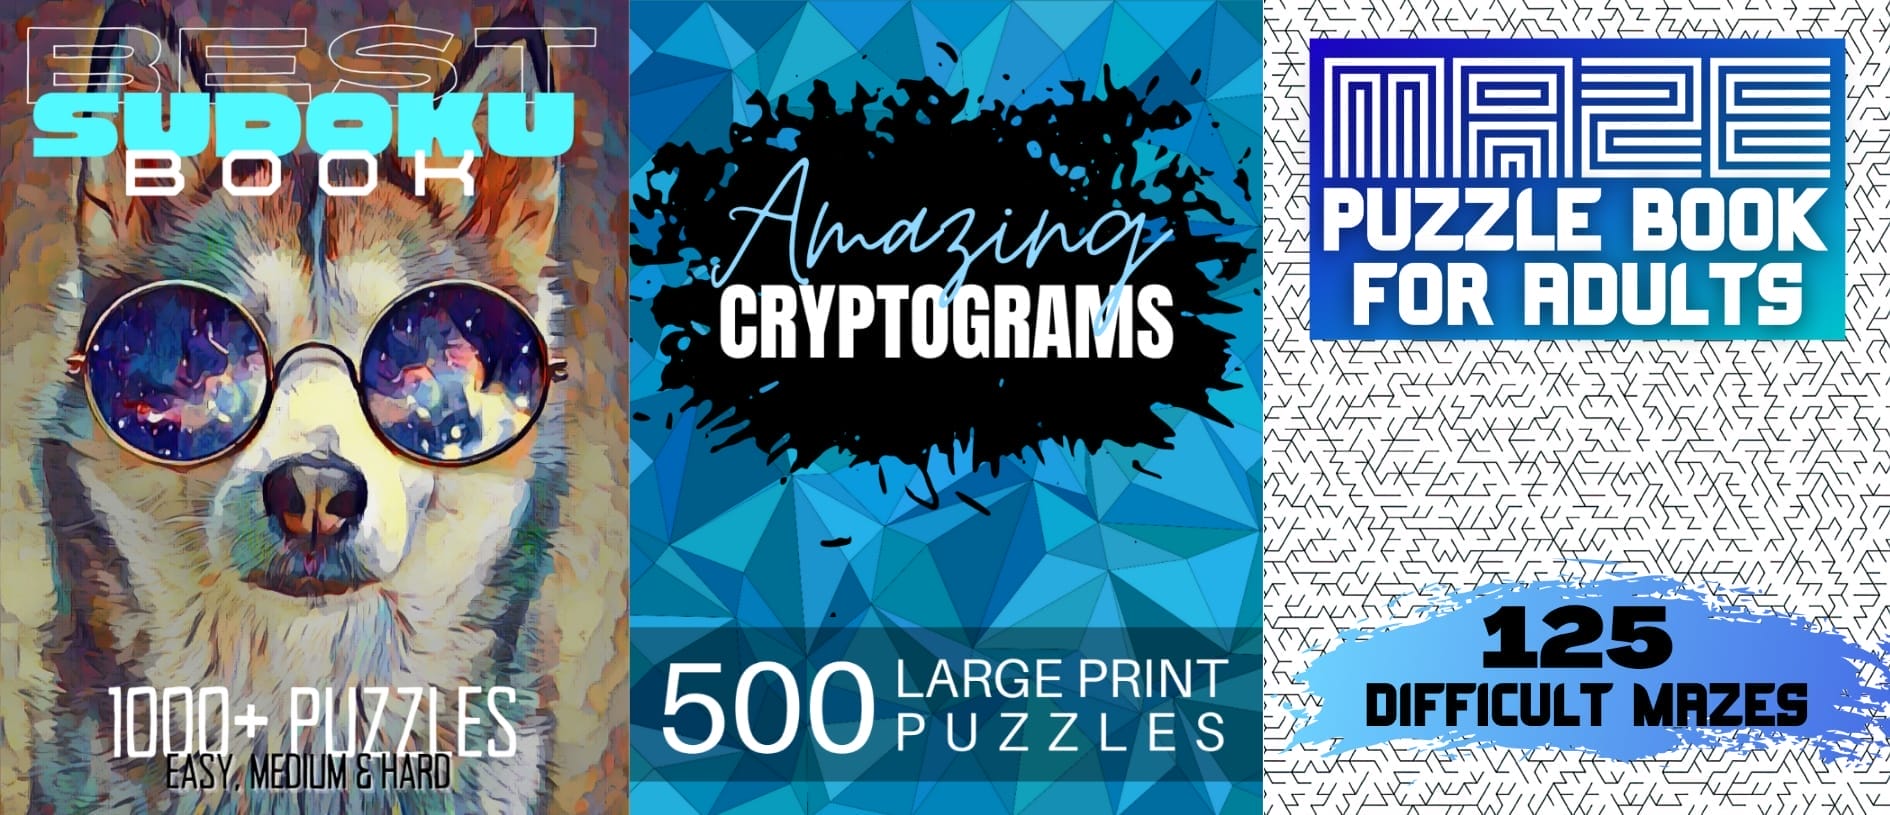 Best Puzzle Books for Adults